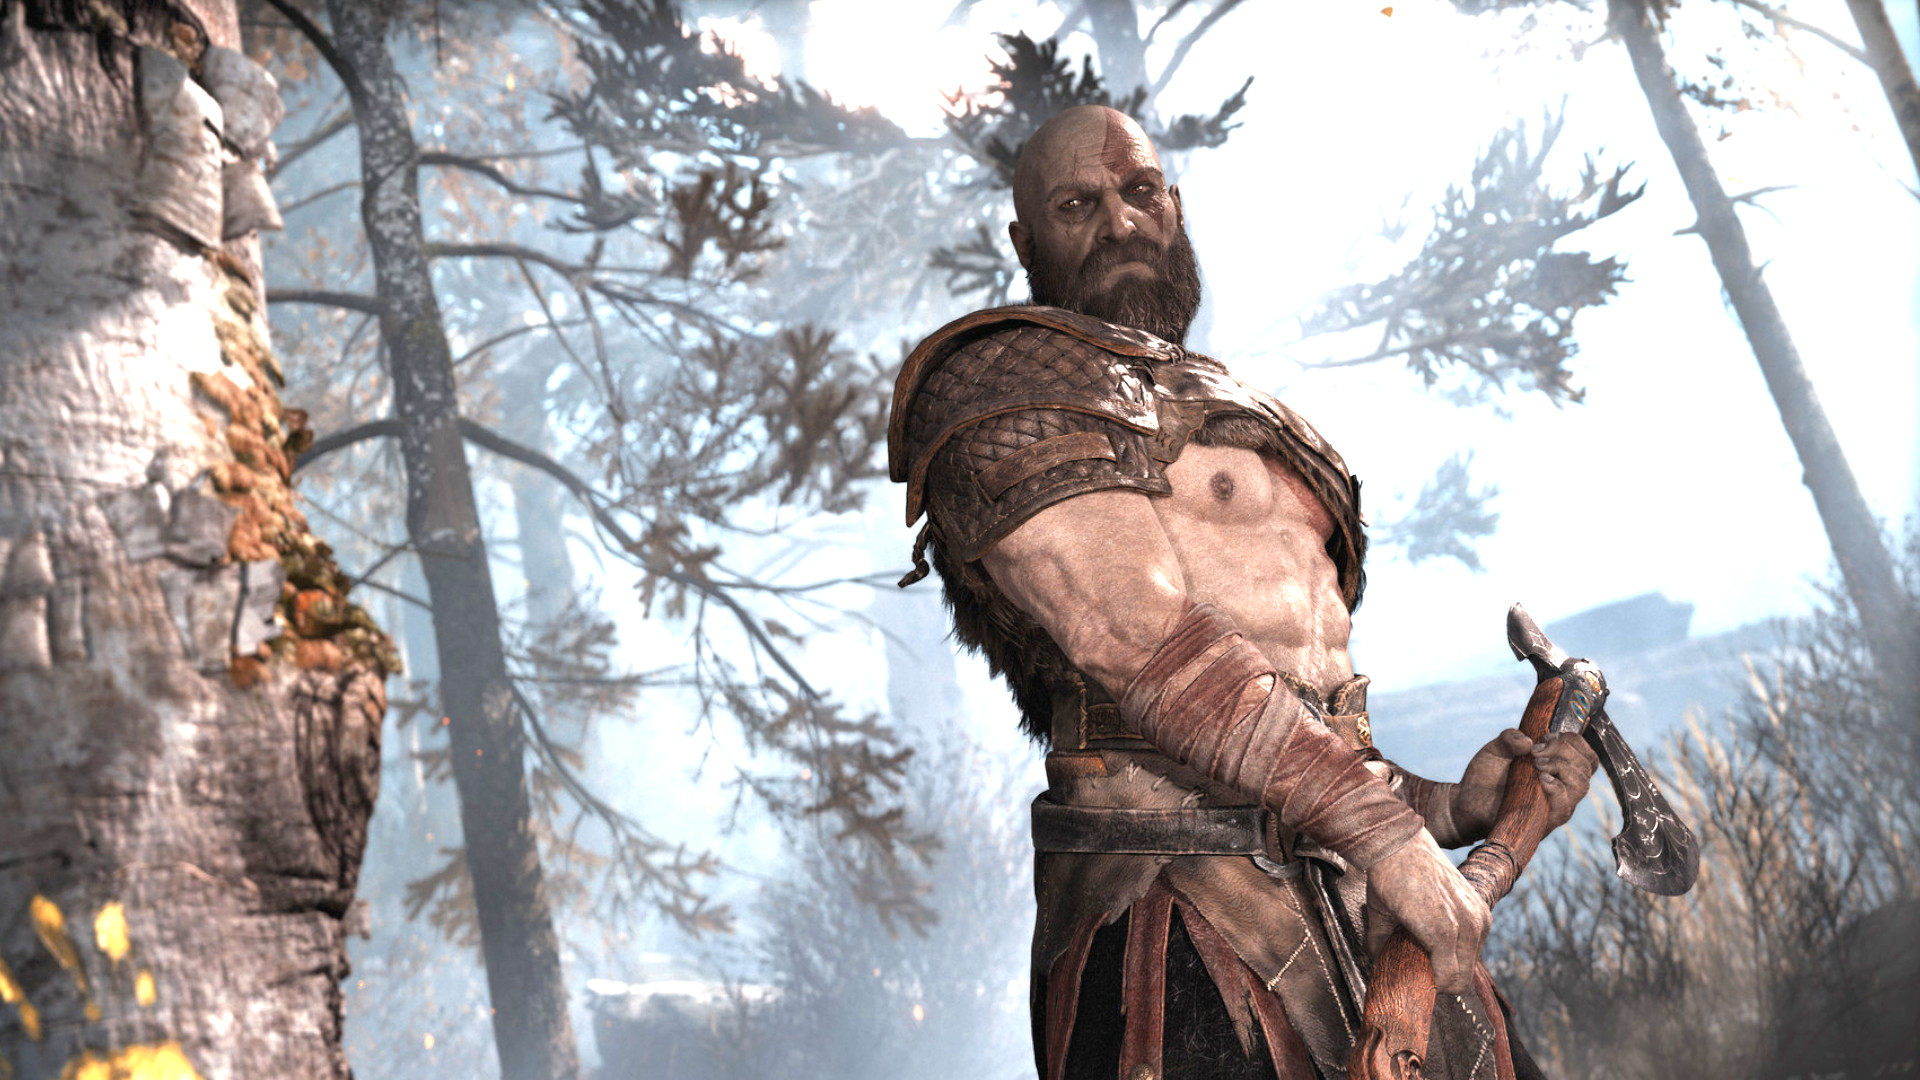 God of War PC release date, time, pre-order price, Steam & Epic